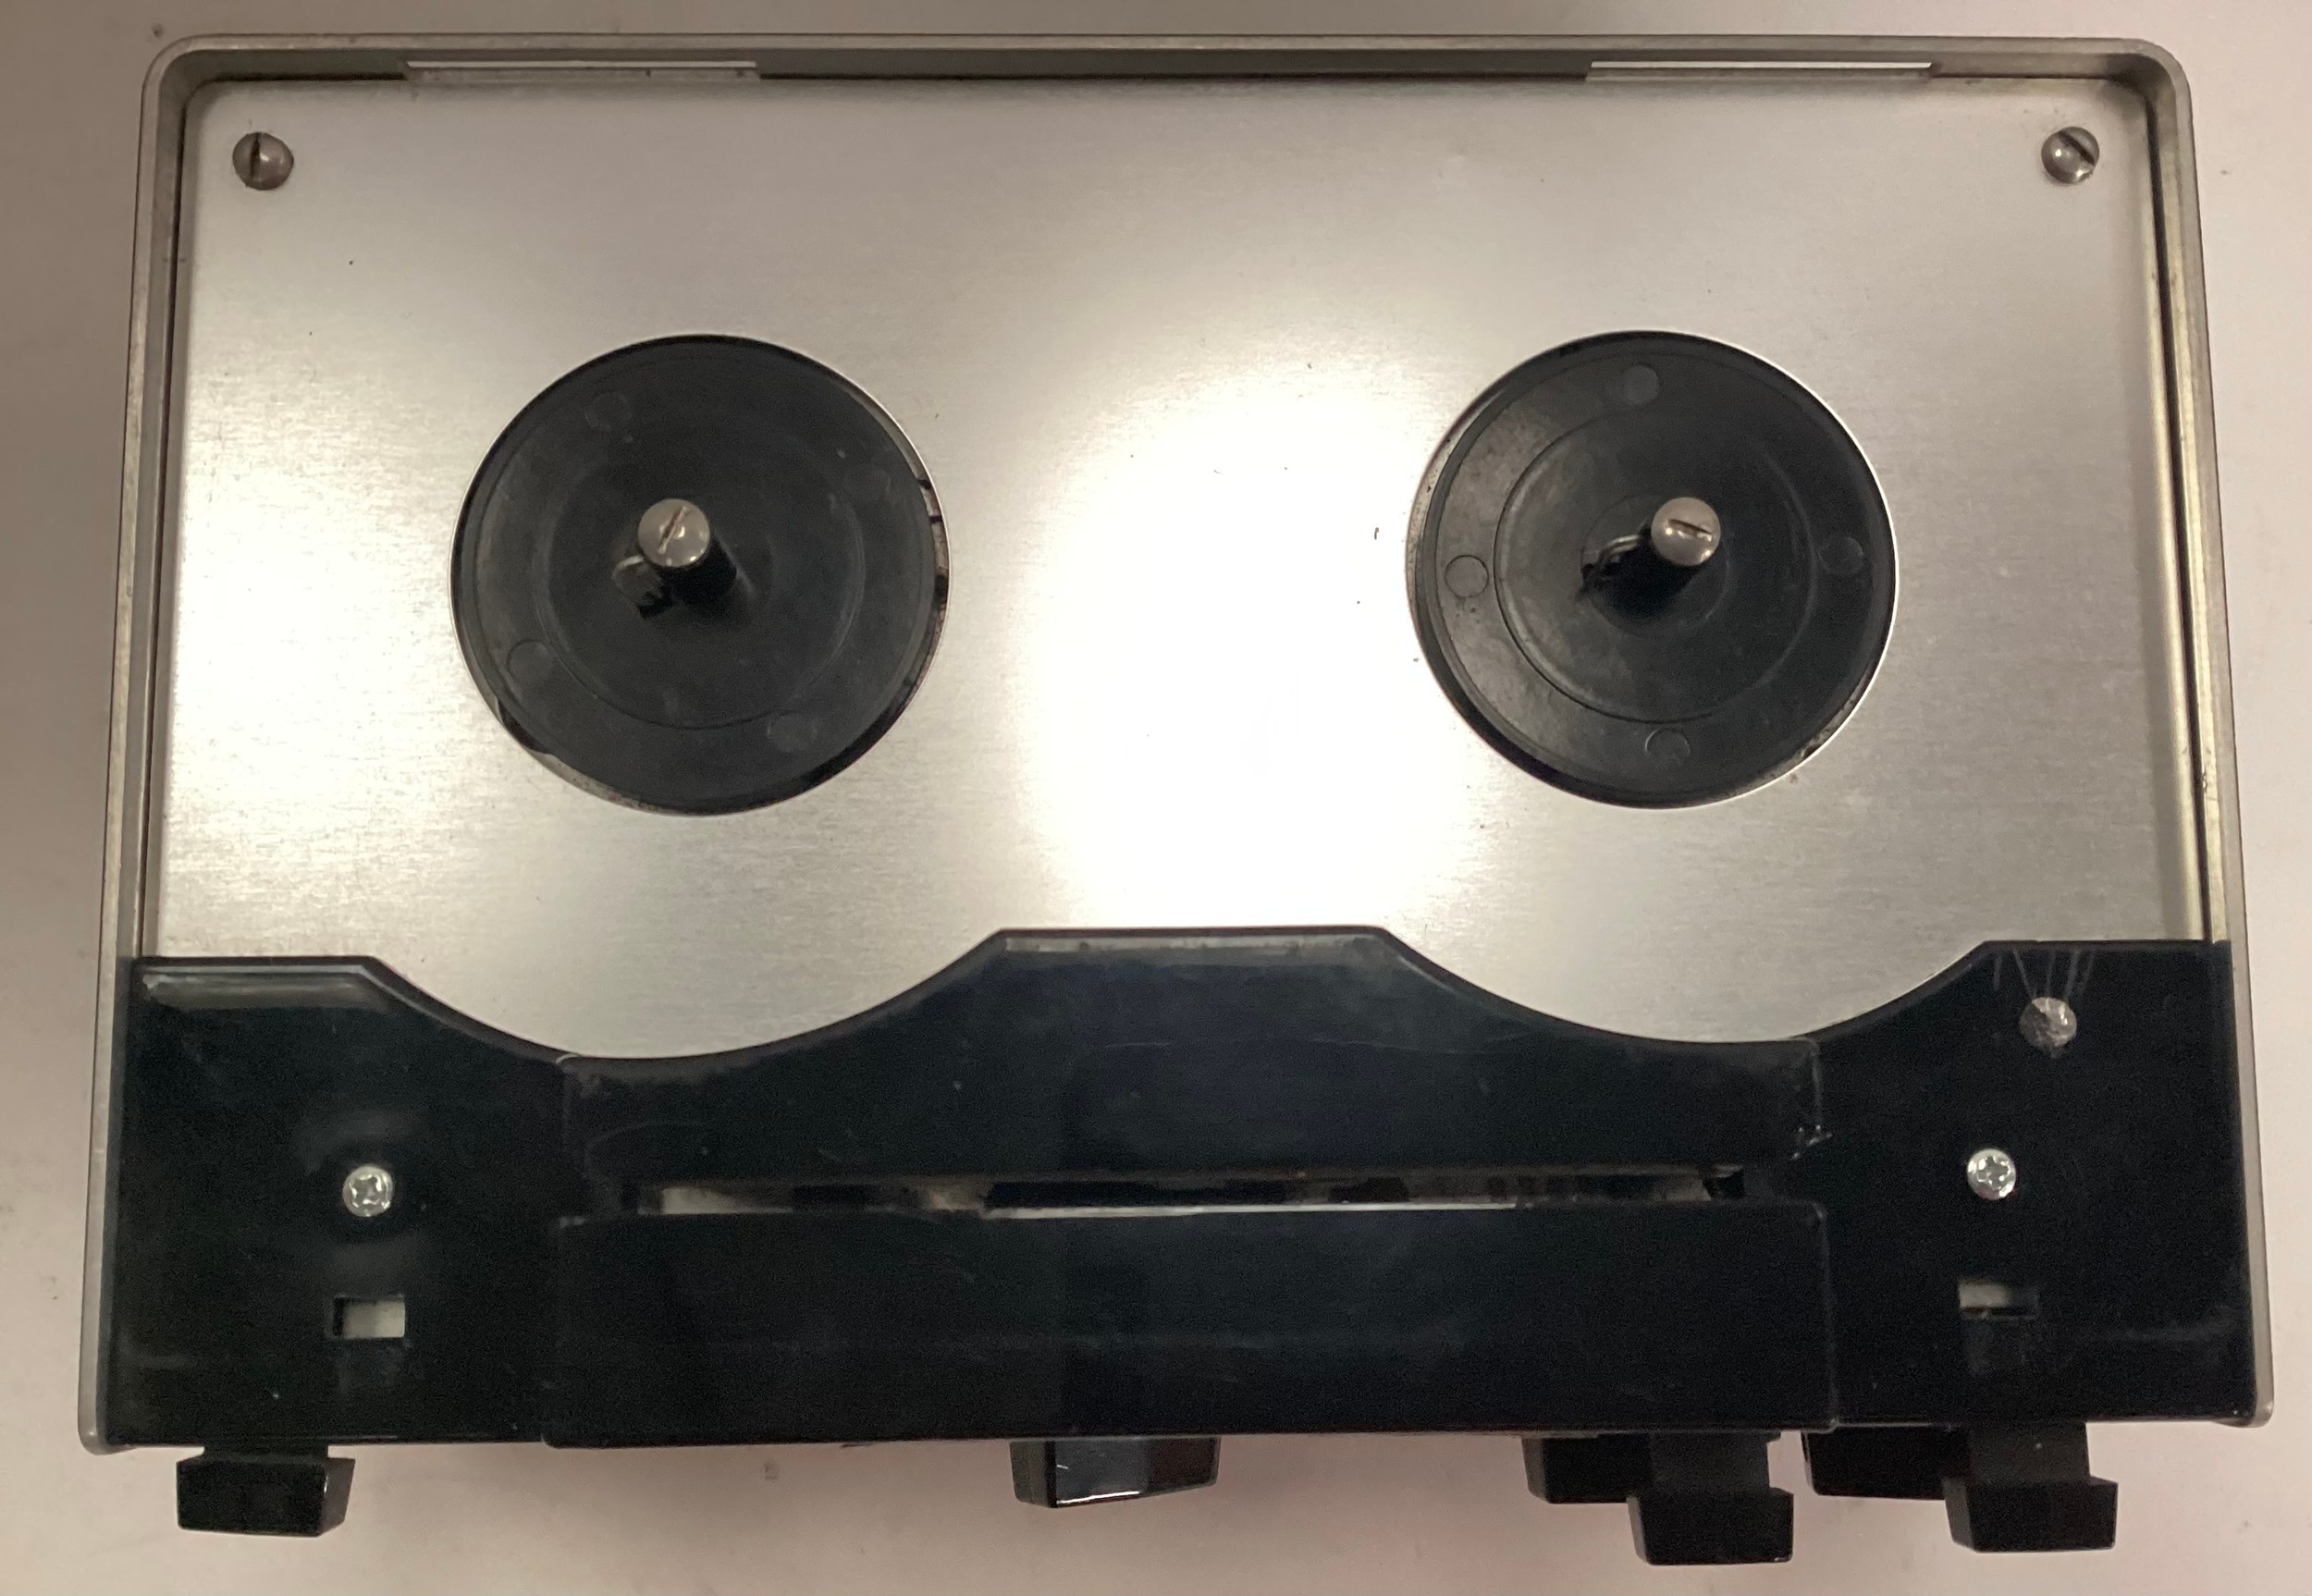 FI-CORD PORTABLE REEL TO REEL TAPE RECORDERS. Here we have 2 tape recorders model No. 202A. One - Image 5 of 8